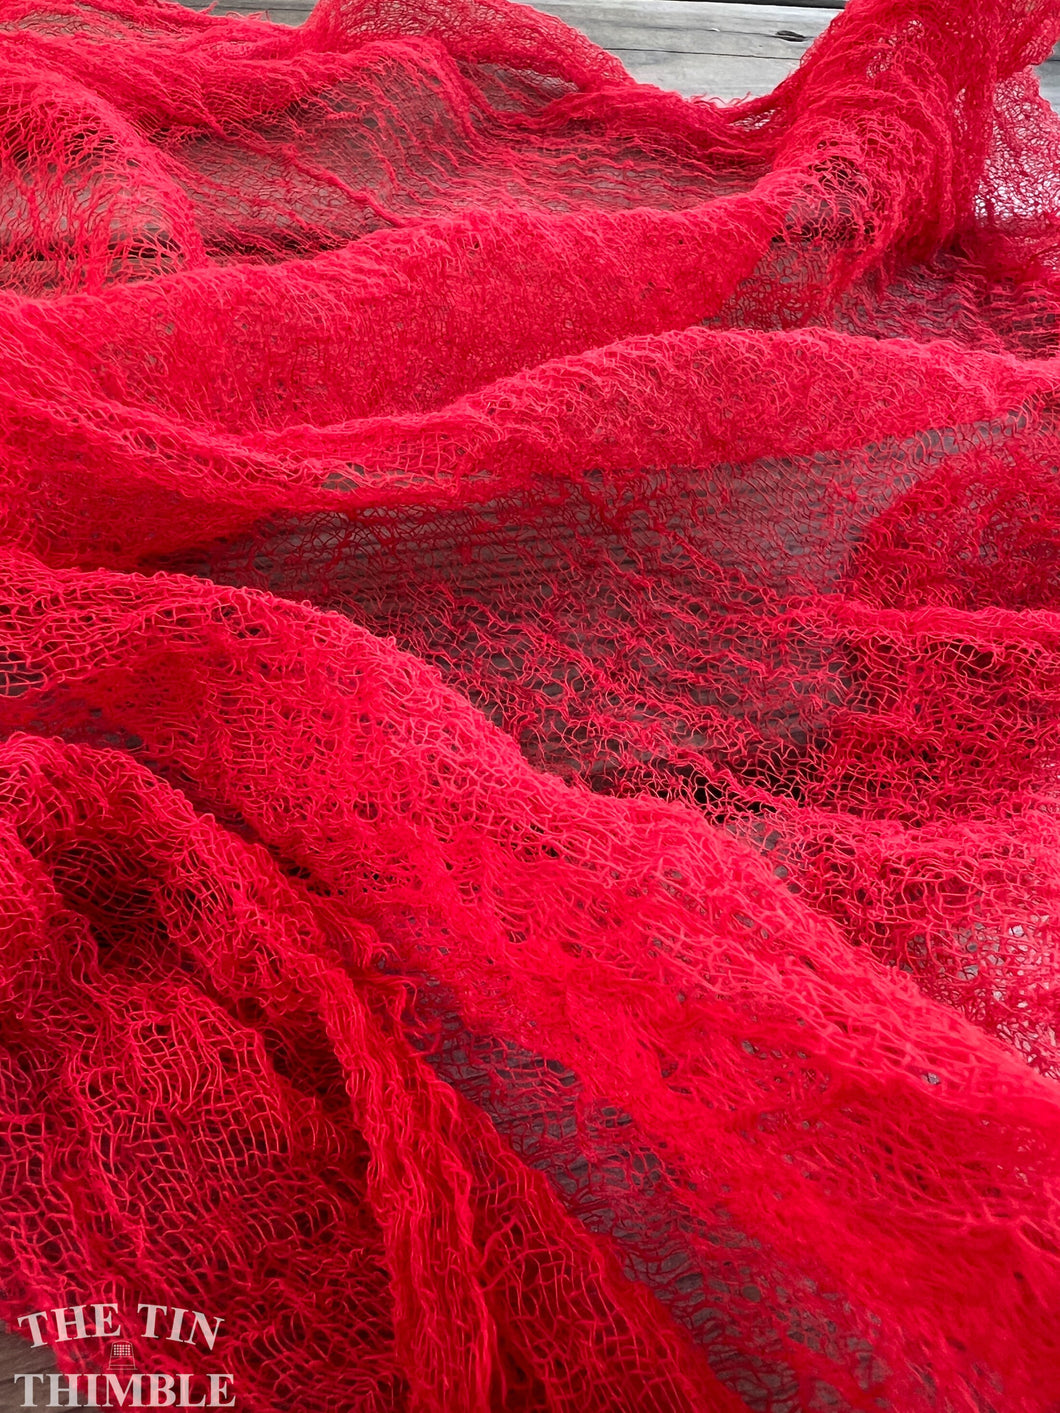 Hand Dyed Cotton Gauze Scrim Cheesecloth for Sewing or Nuno Felting in Red / Scarf for Felting or Wearing as Is / By the Yard